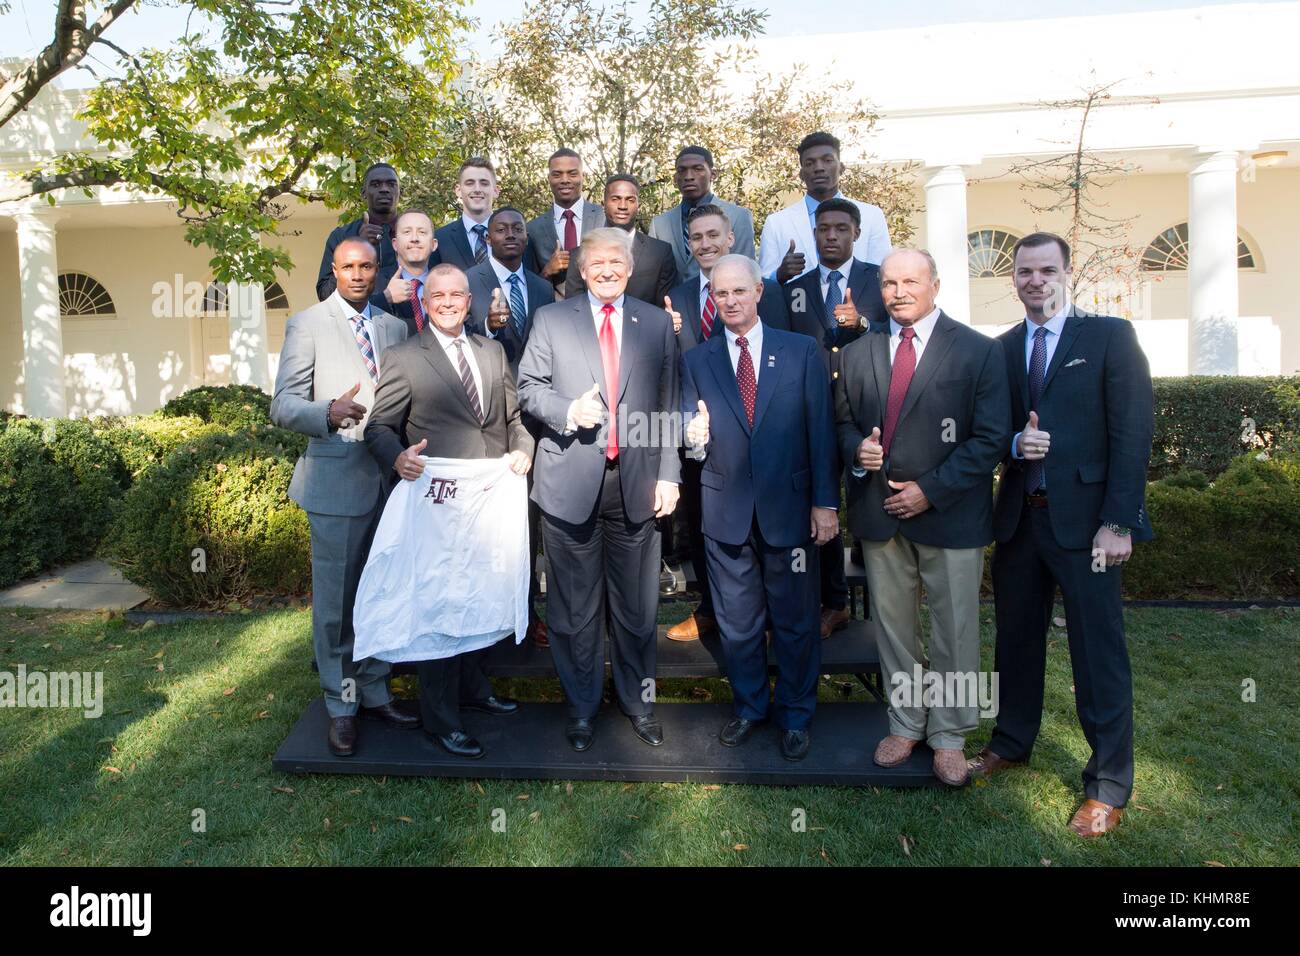 Washington DC, USA. 17th November, 2017. U.S. President Donald Trump poses with the Texas AM Texas University Men's Indoor Track and Field NCAA National Championship Team at the White House November 17, 2017 in Washington, D.C. Credit: Planetpix/Alamy Live News Stock Photo